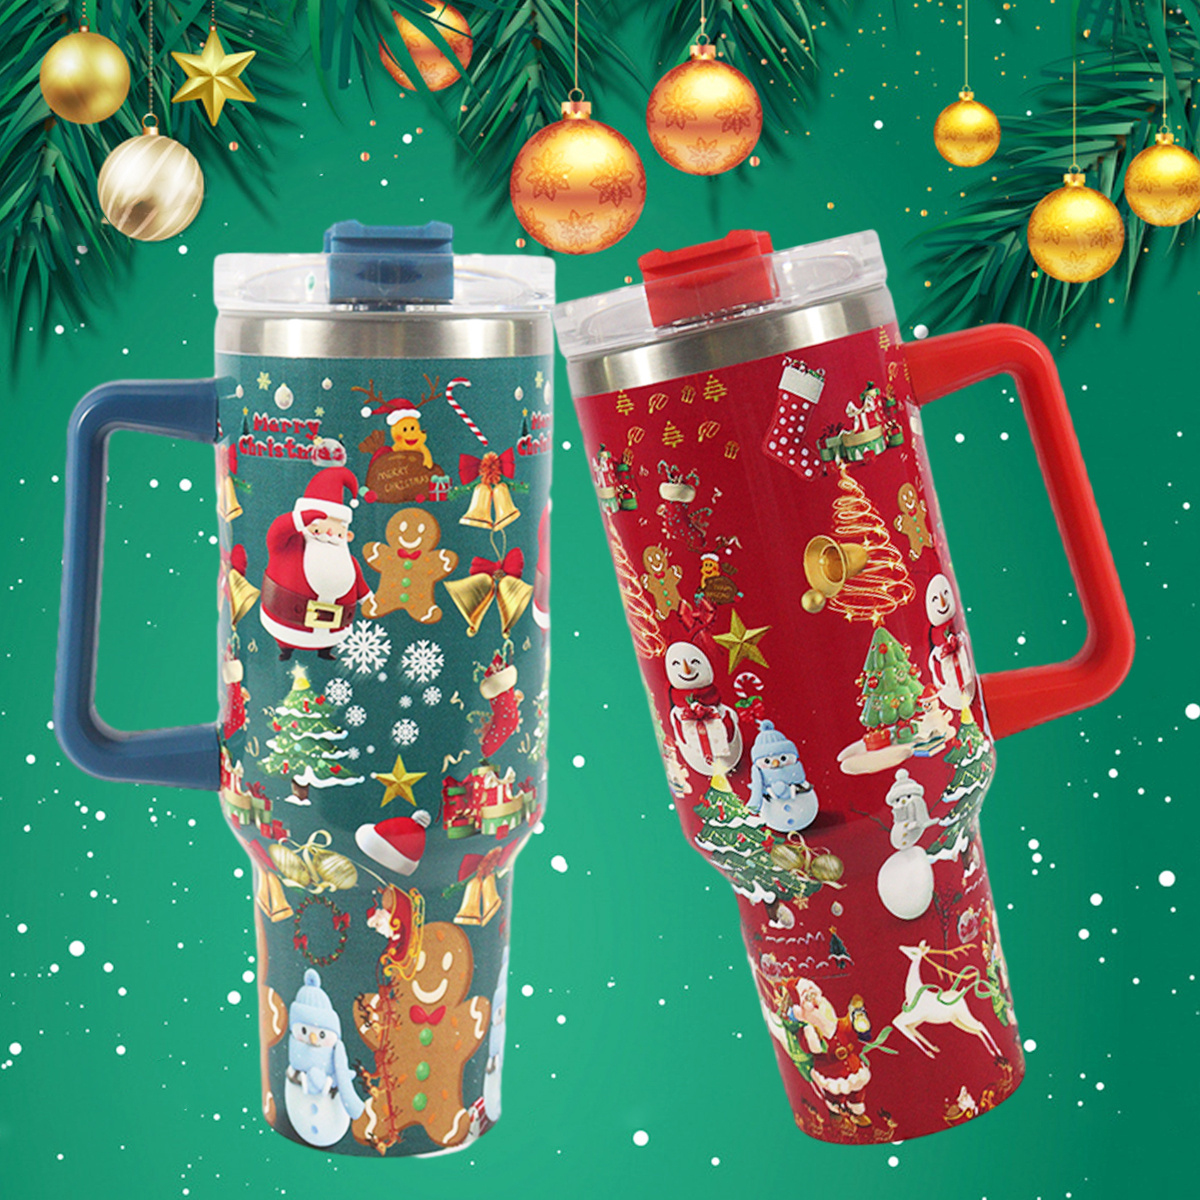 Limited Edition Holiday Gifts, Insulated Cups, Mugs, Water Bottles